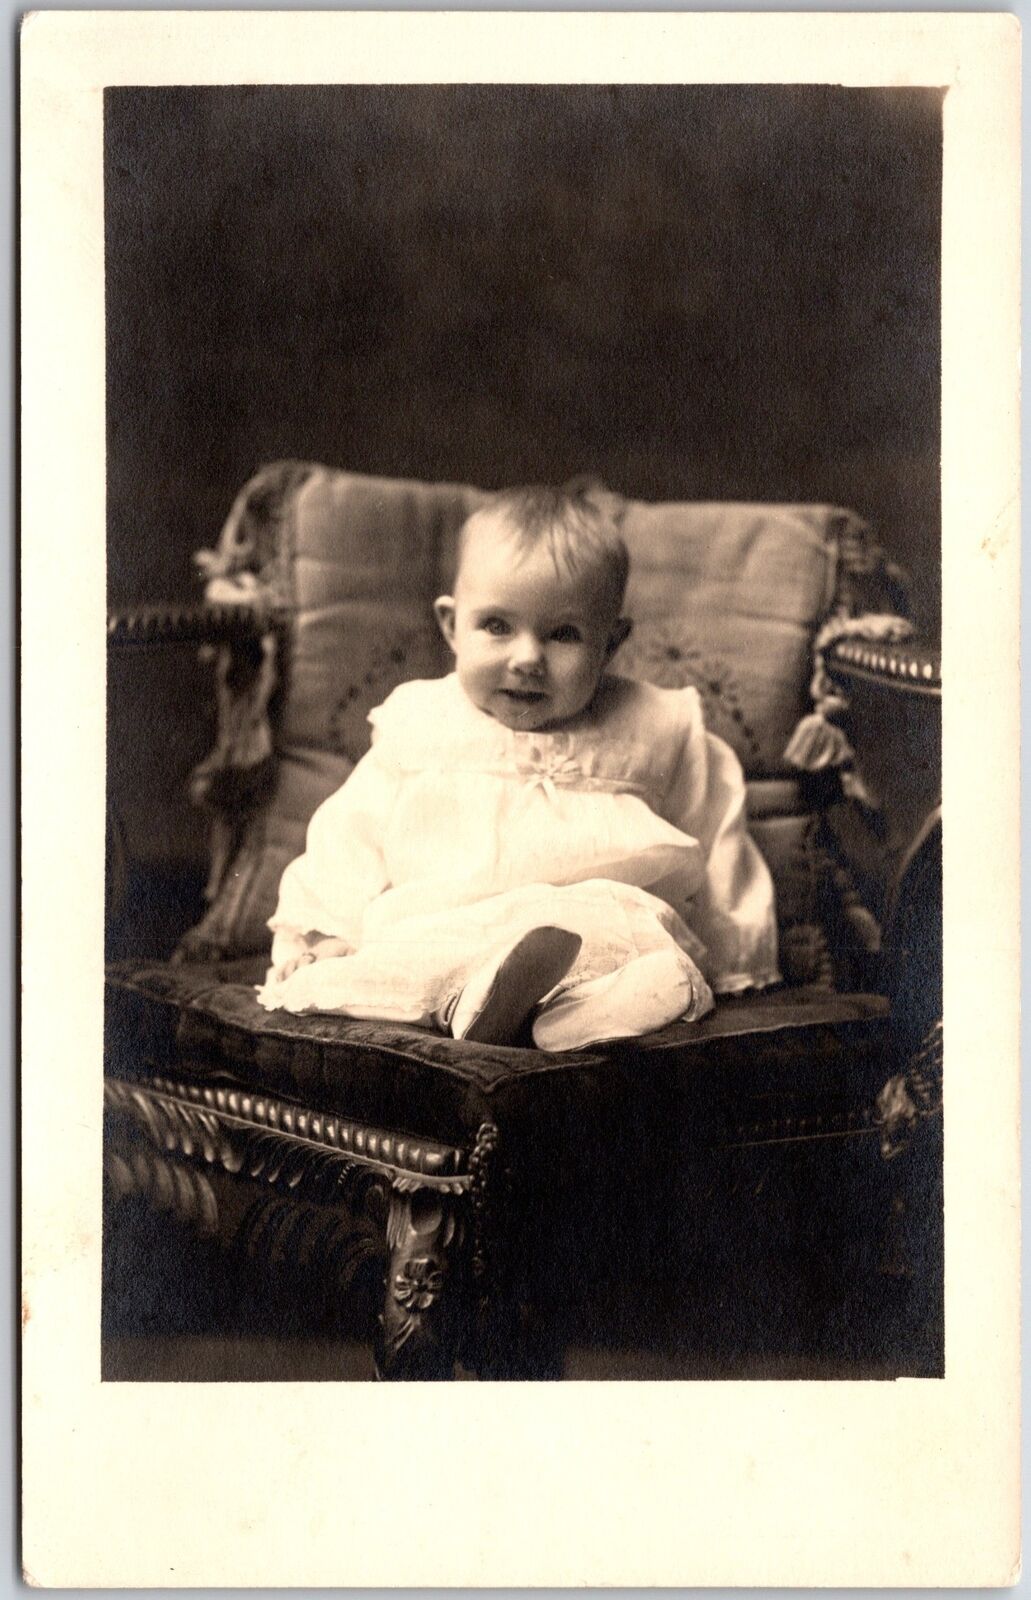 Baby Infant Photograph Beautiful Little Girl Sitting On Chair Postcard